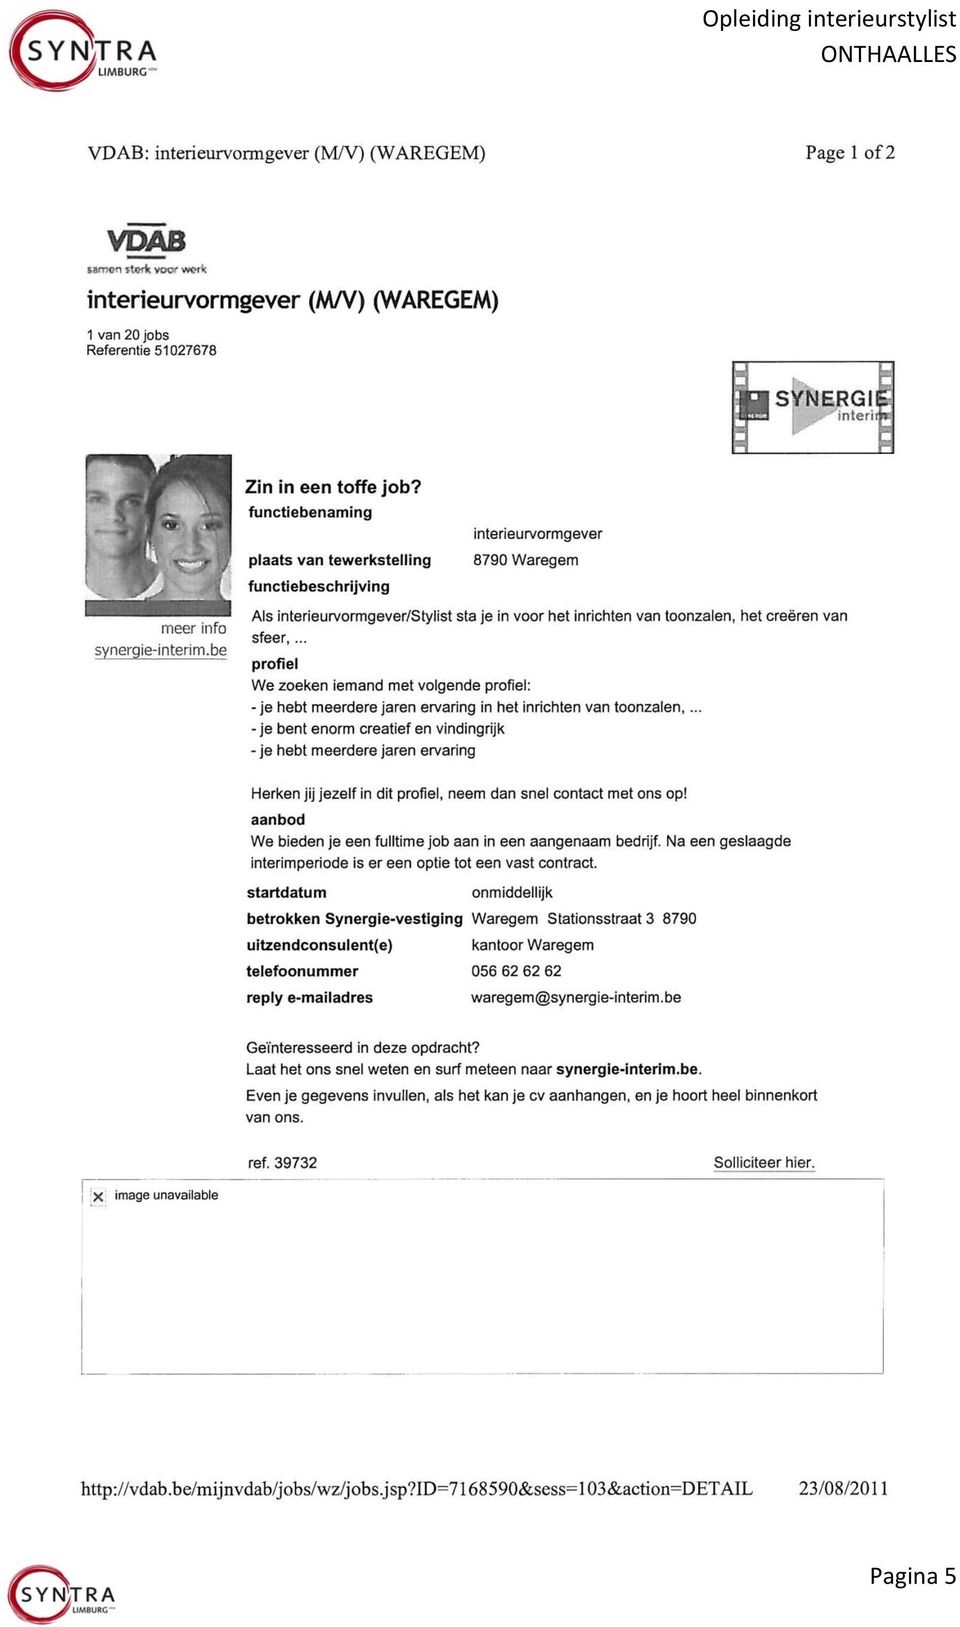 Opleiding Interieurstylist Onthaalles Pdf Free Download